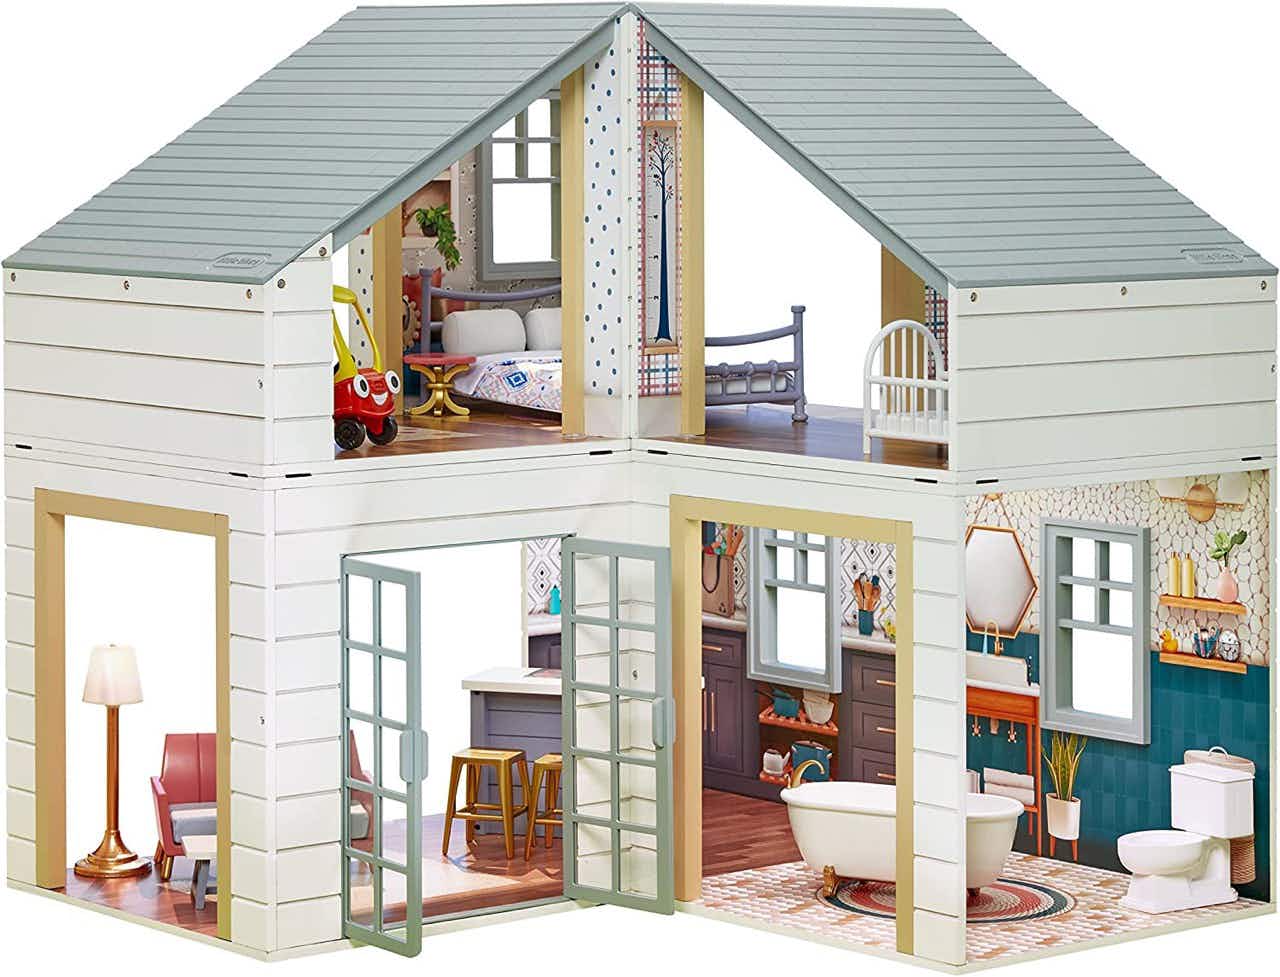 A Little Tikes Real Wood Stack 'n Style Dollhouse on a white background